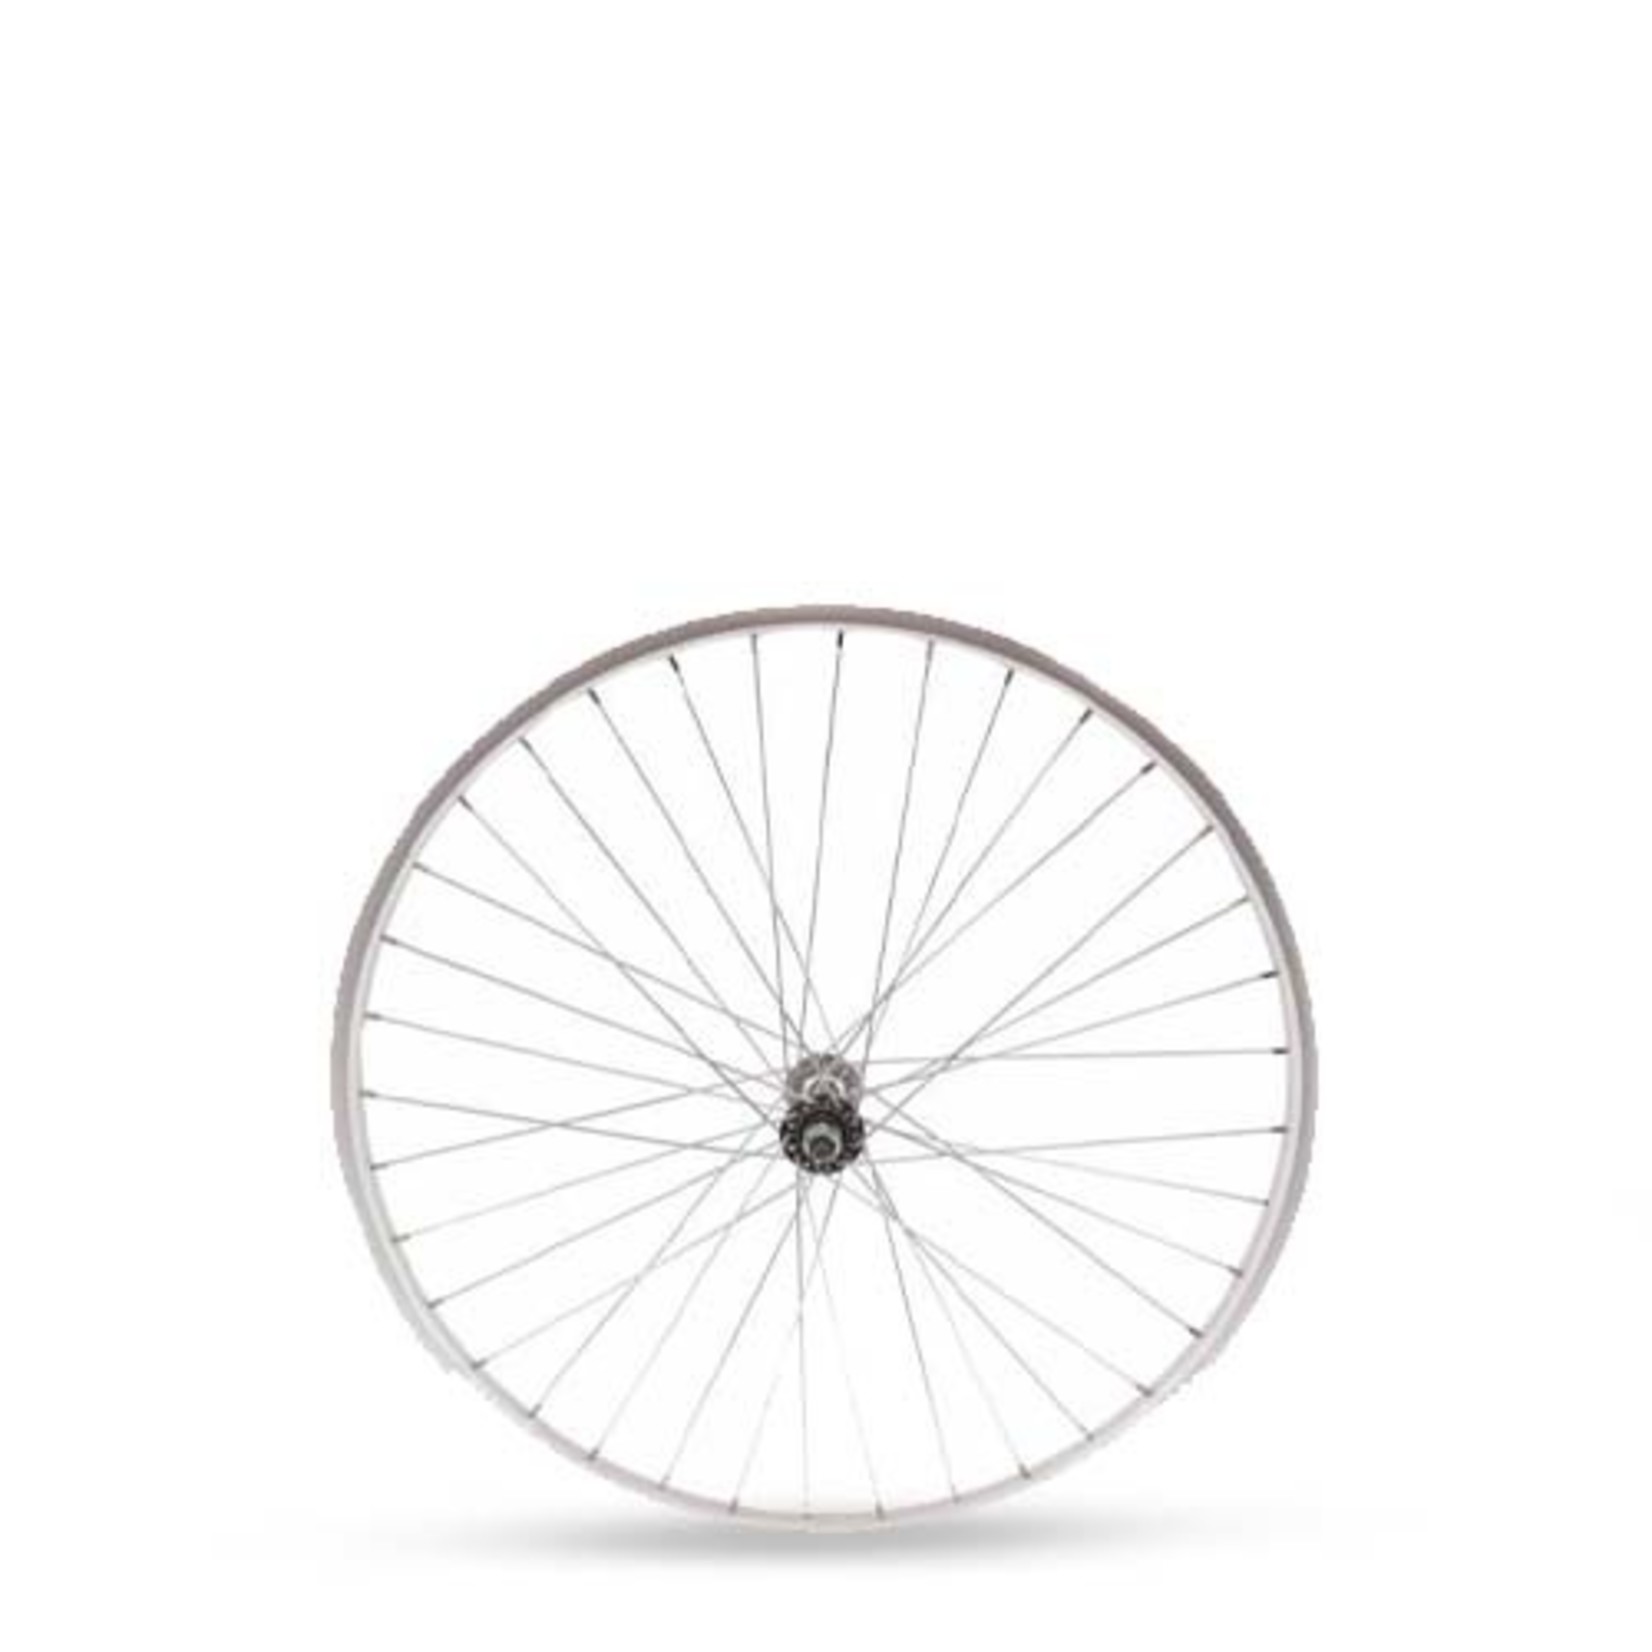 24" ALLOY SILVER FRONT WHEEL